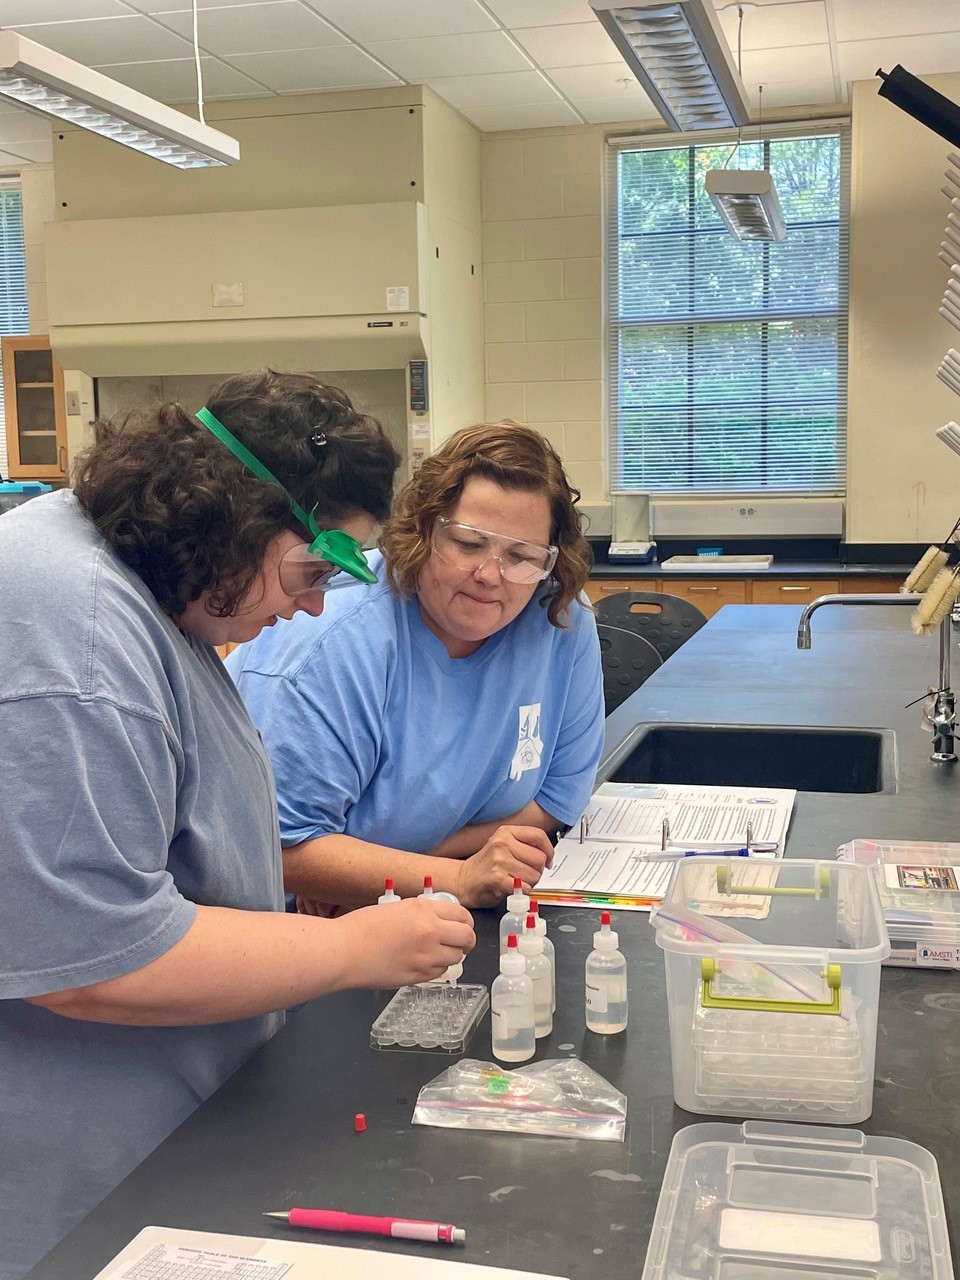 Teachers investigate the solubility and reactivity of the alkaline earth metals as part of Dewayne Riddle’s chemistry lab examining periodic trends for high school chemistry.